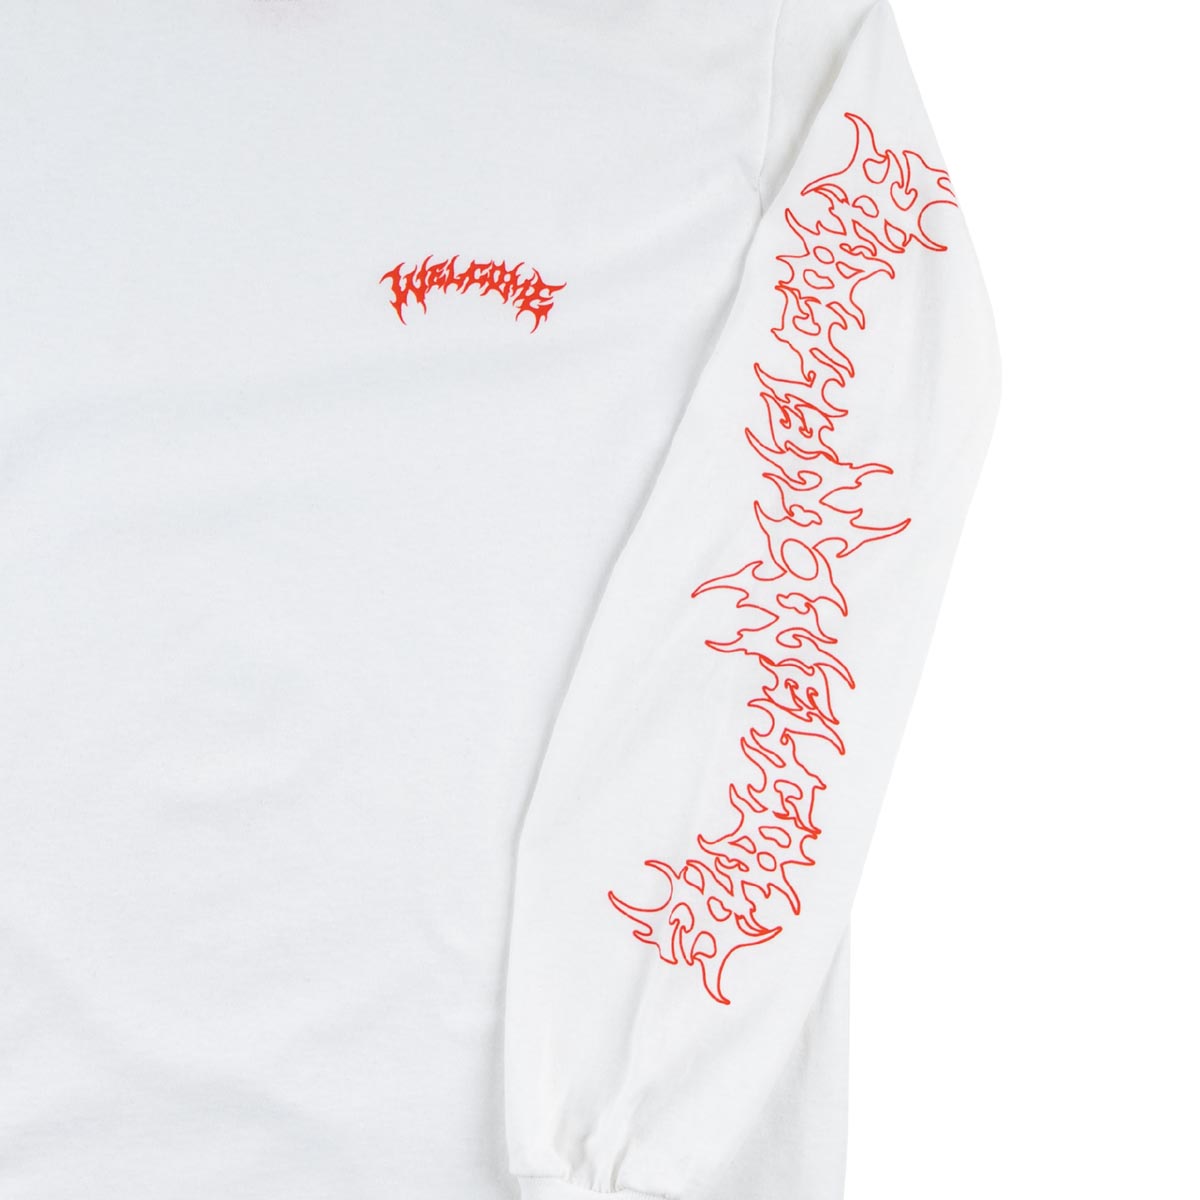 Welcome Barb Long Sleeve T-Shirt - White/Red image 2